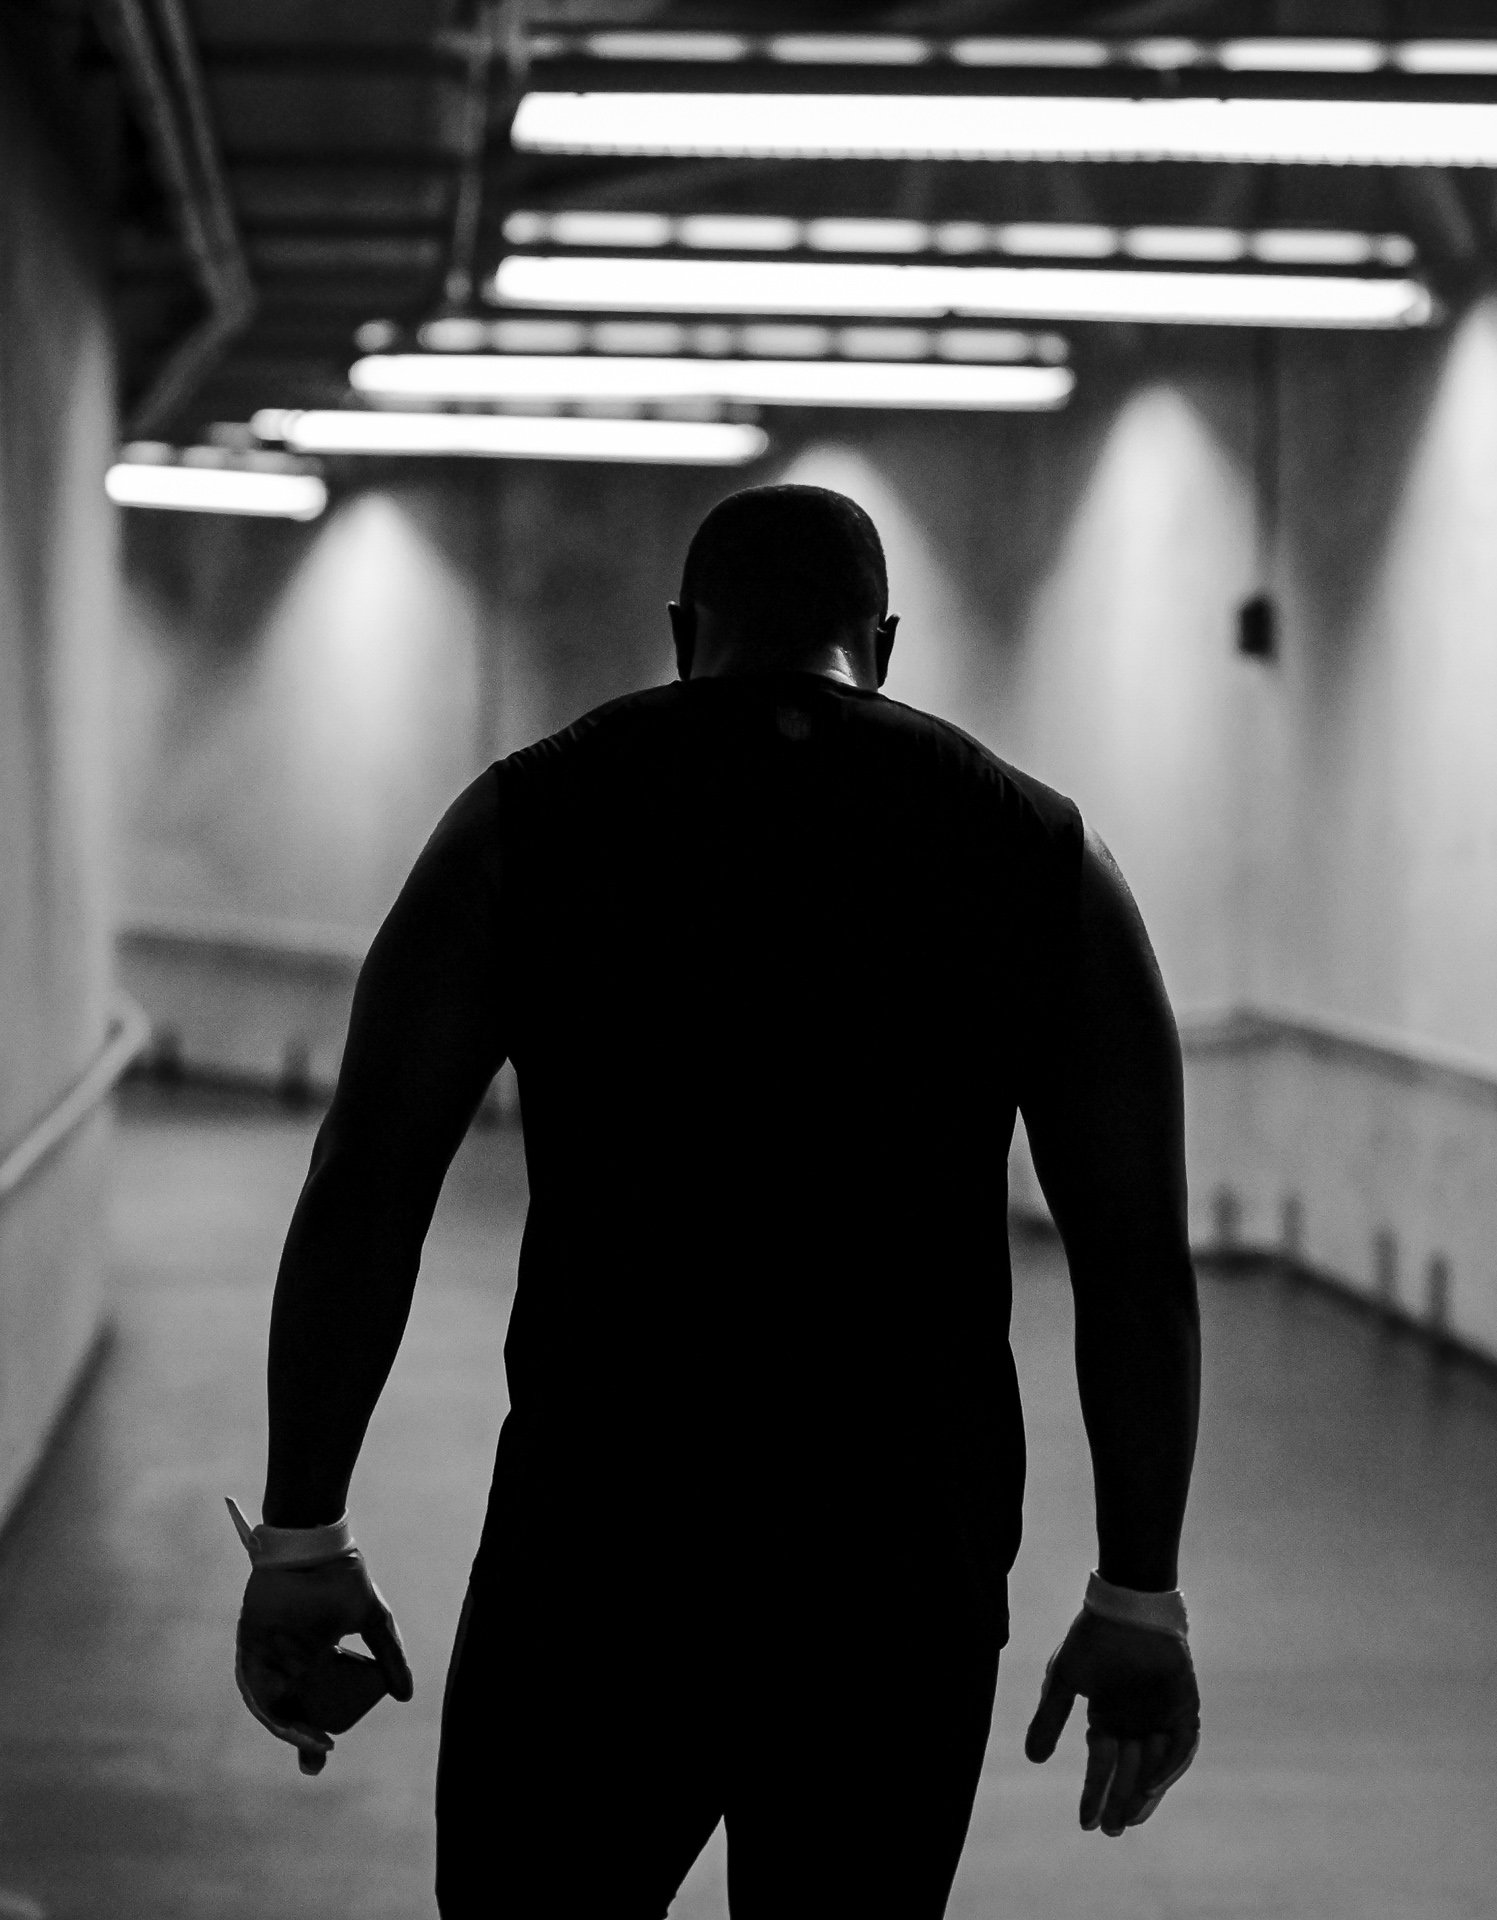  Atlanta Falcons defensive end Nick Thurman #91 walks through the tunnel before the game against the Detroit Lions at Ford Field in Detroit, Michigan on Friday, August 12, 2022. (Photo by Shanna Lockwood/Atlanta Falcons) 